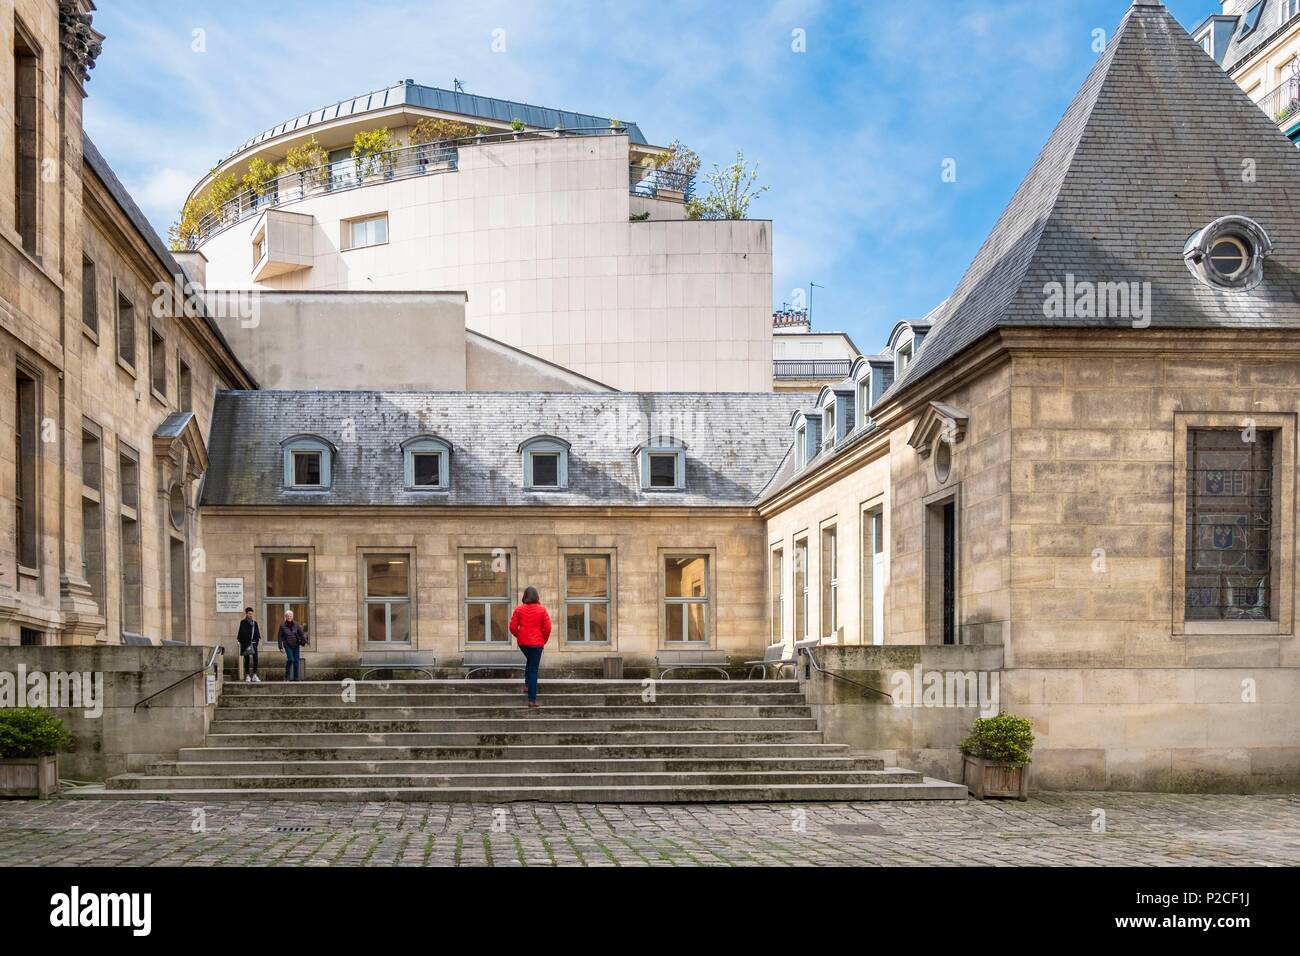 France, Paris, Bibliotheque Historique de la Ville de Paris or BHVP, public library specializing in the history of the city of Paris, founded in 1871 and located since 1969 in the Lamoignon Hotel (16th century) Stock Photo